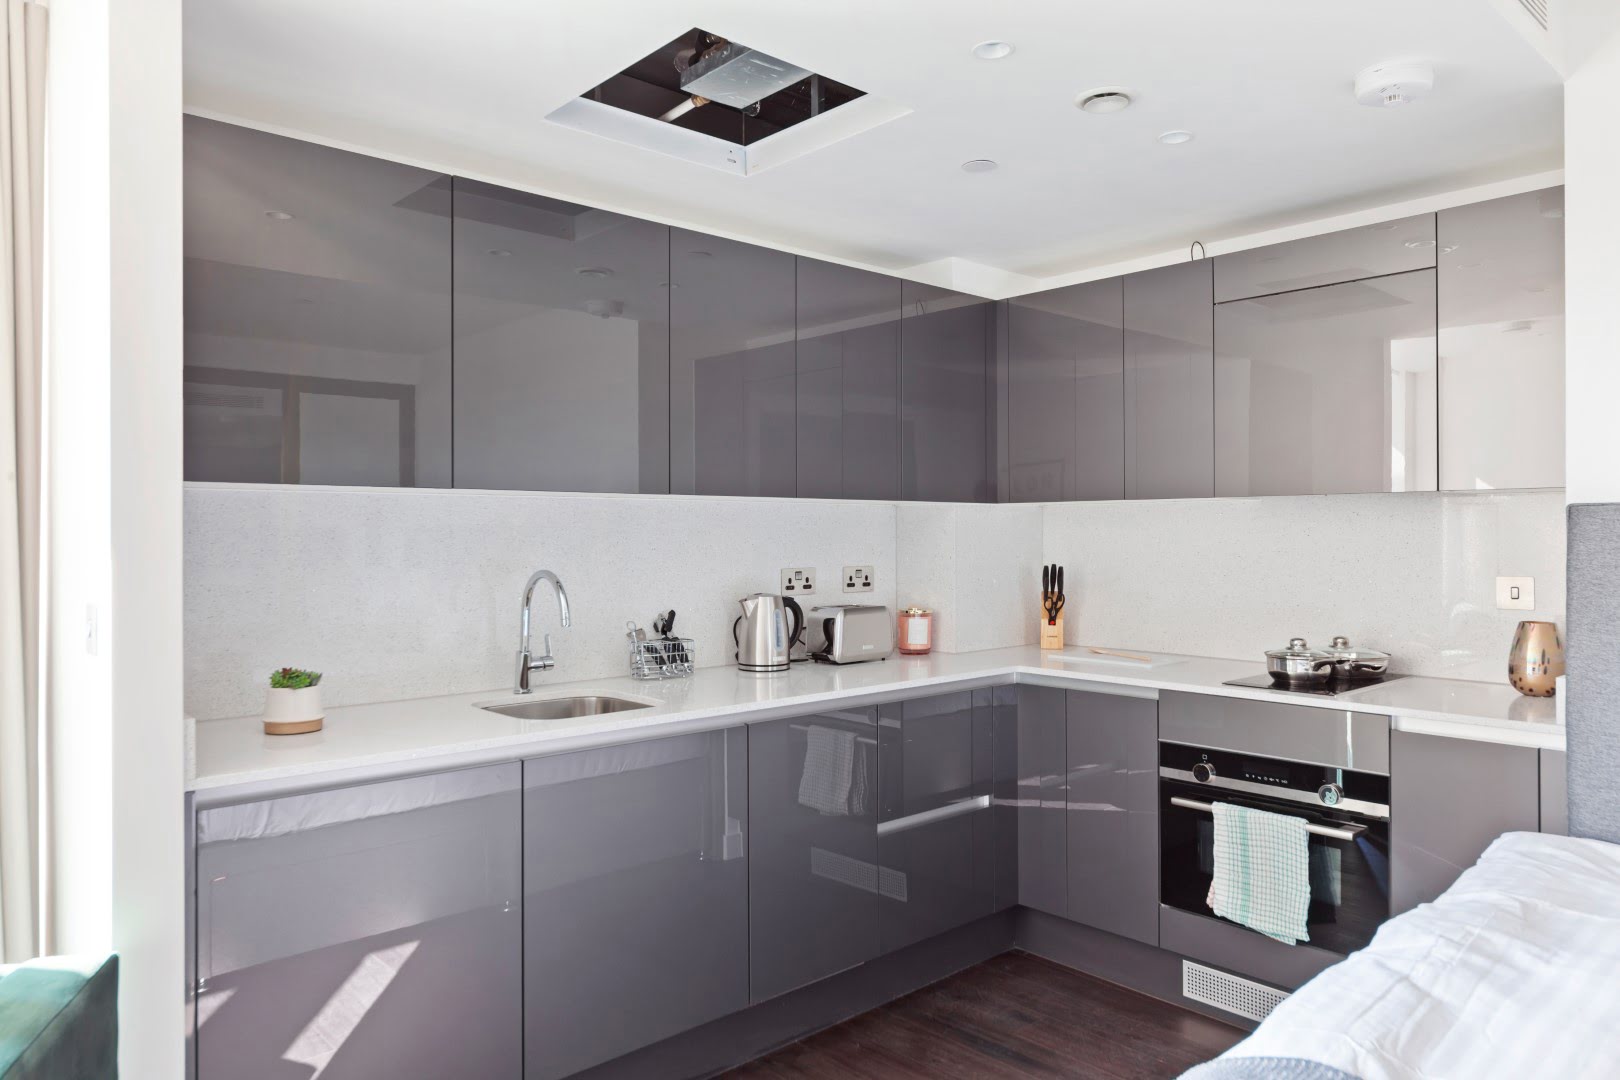 This image shows a modern kitchen with gray cabinets, white countertops, recessed lighting, stainless steel appliances, and a sprinkling of domestic accessories.